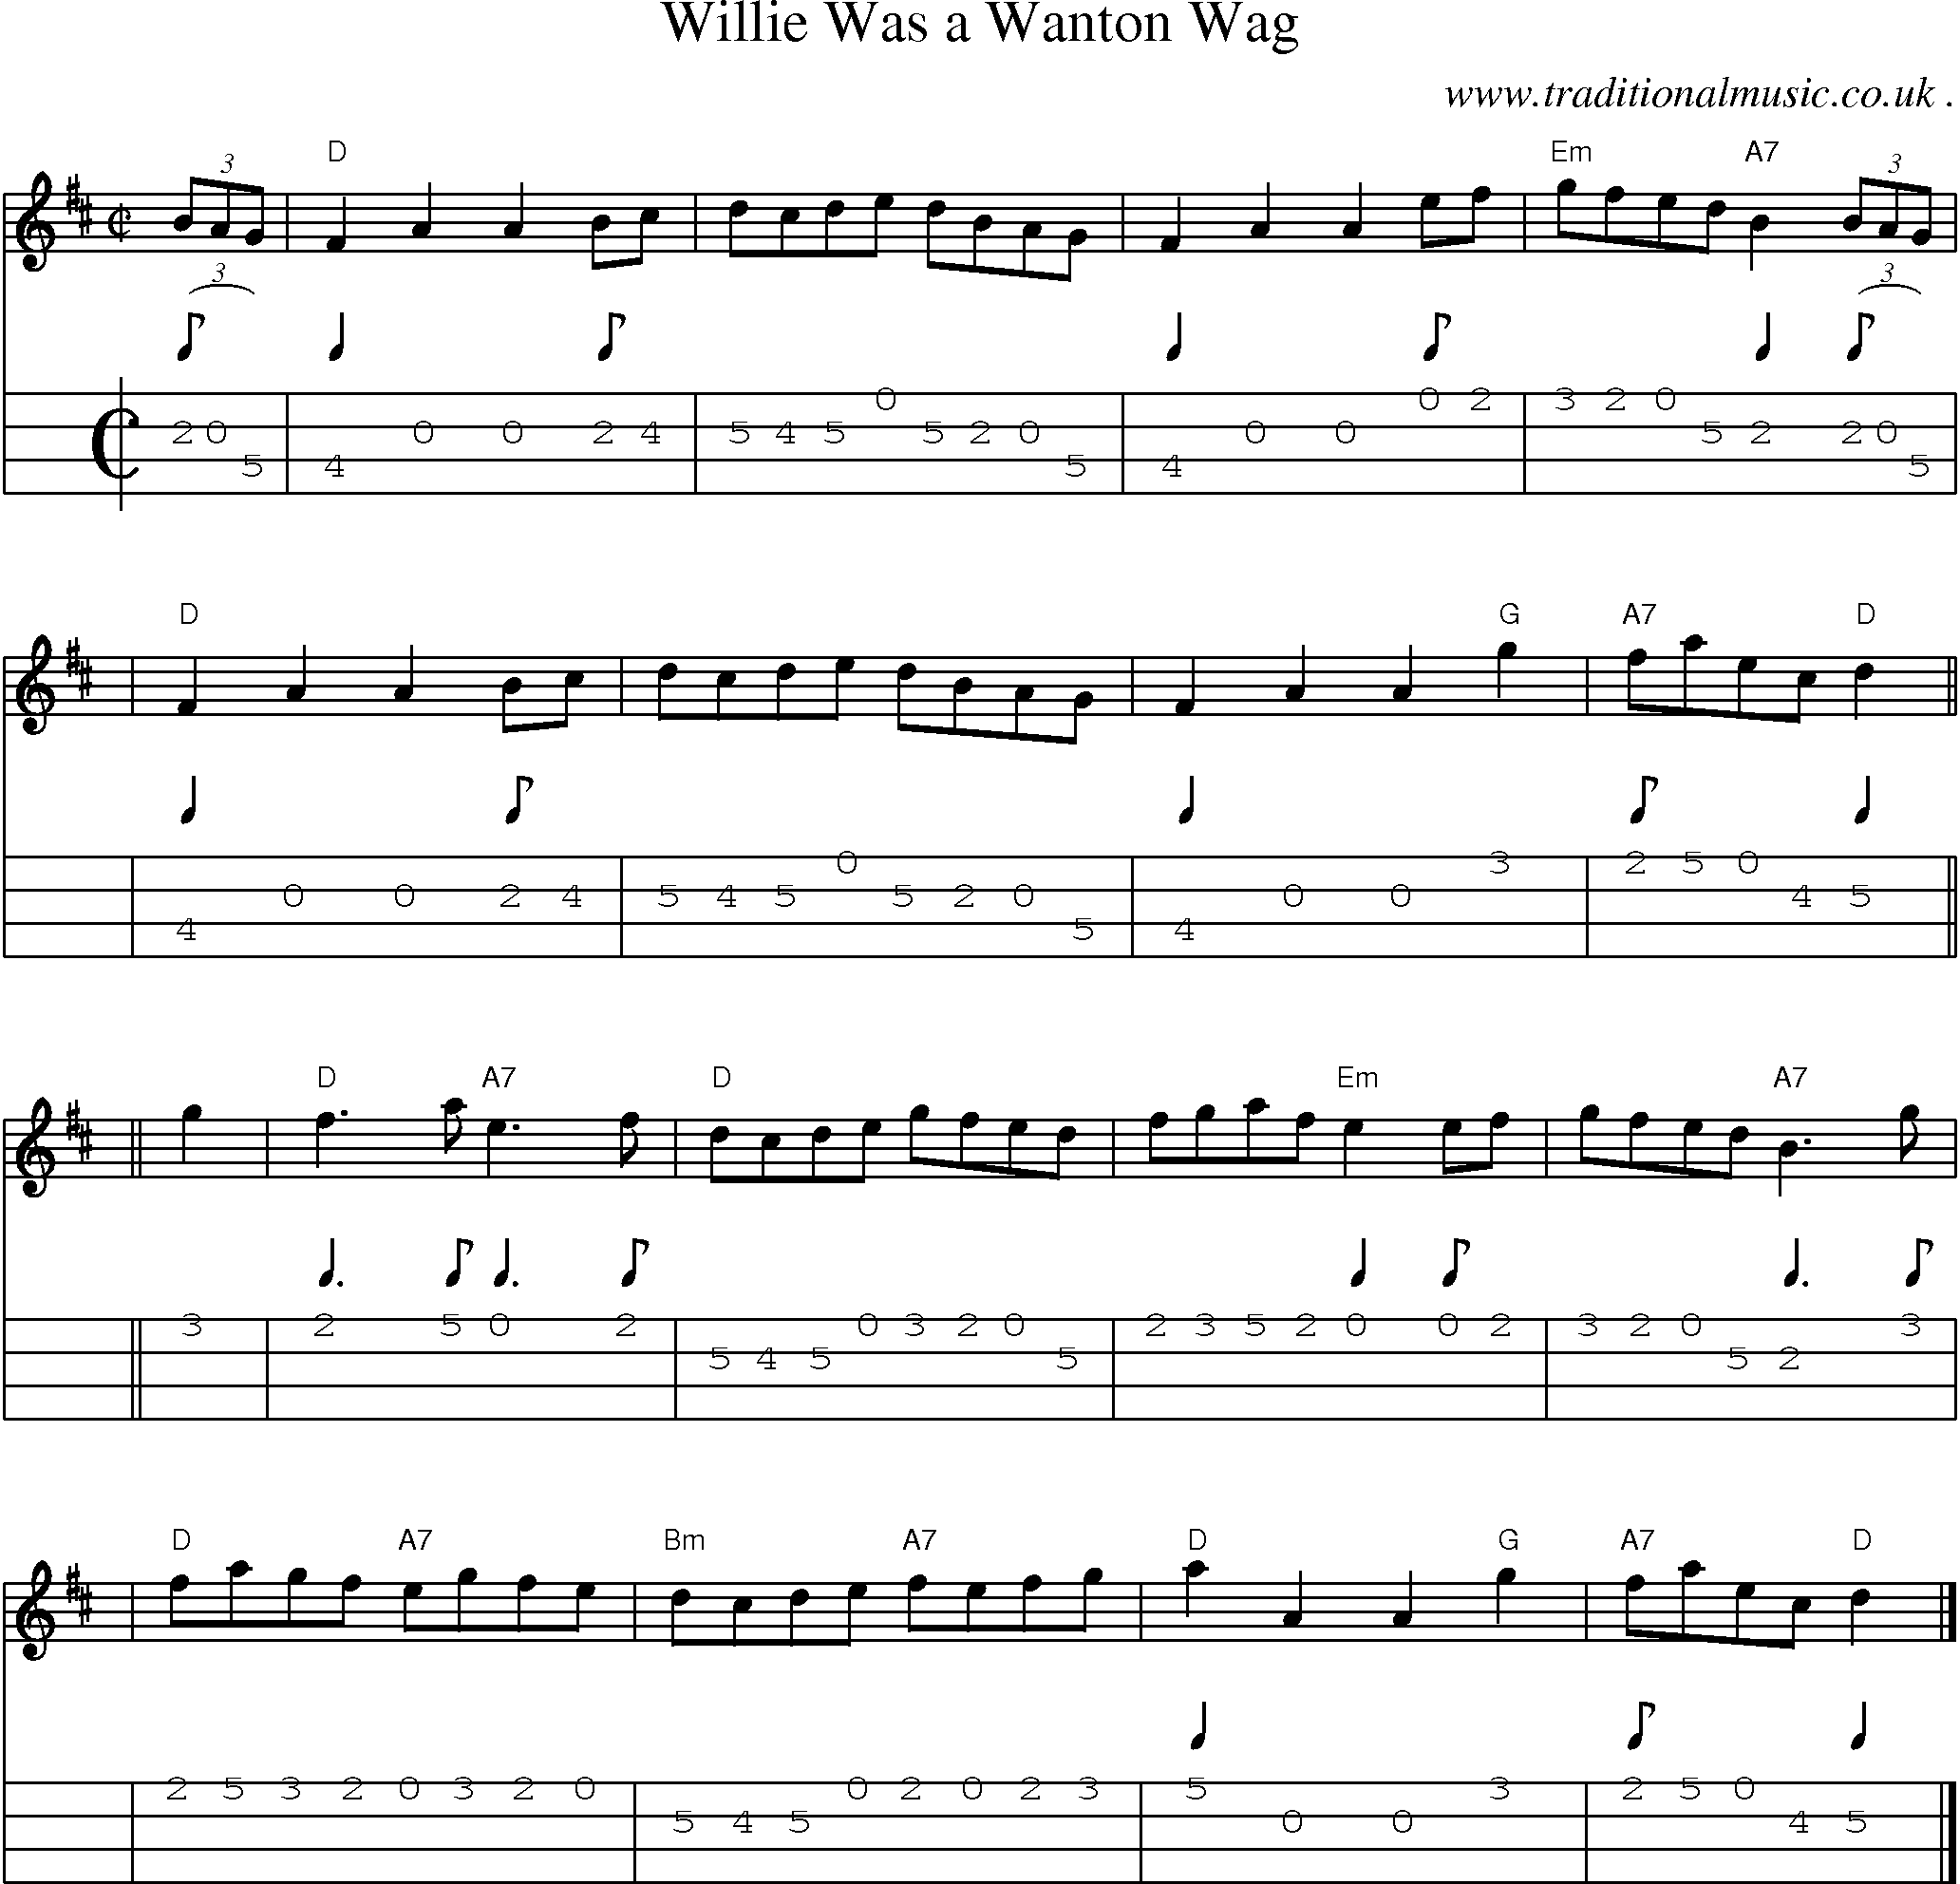 Sheet-music  score, Chords and Mandolin Tabs for Willie Was A Wanton Wag